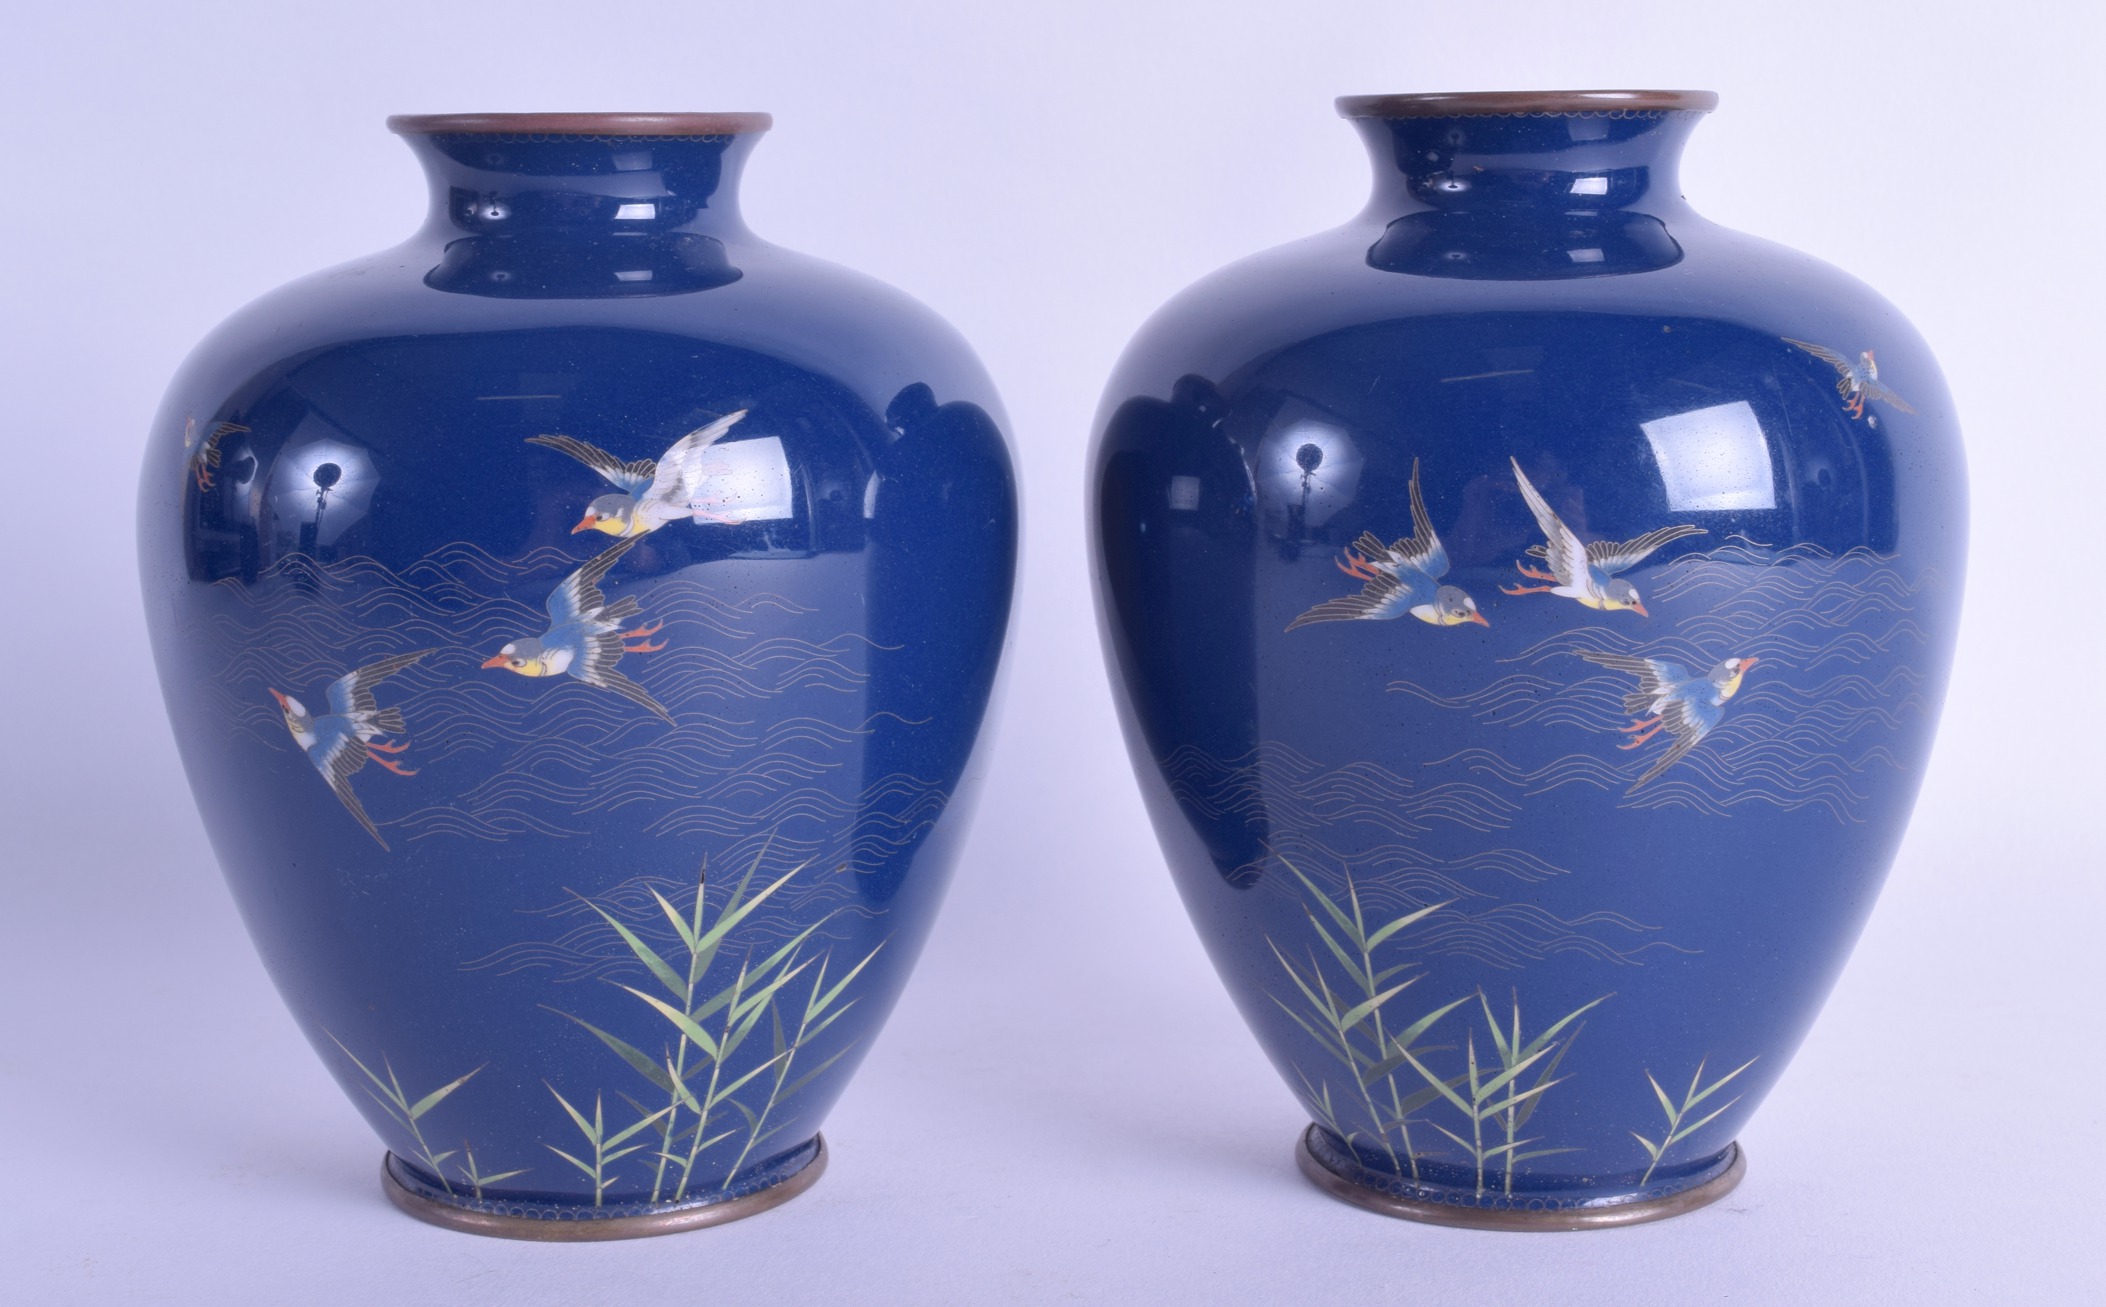 A PAIR OF LATE 19TH CENTURY CHINESE CLOISONNE ENAMEL JARS decorated with silver inlaid birds in